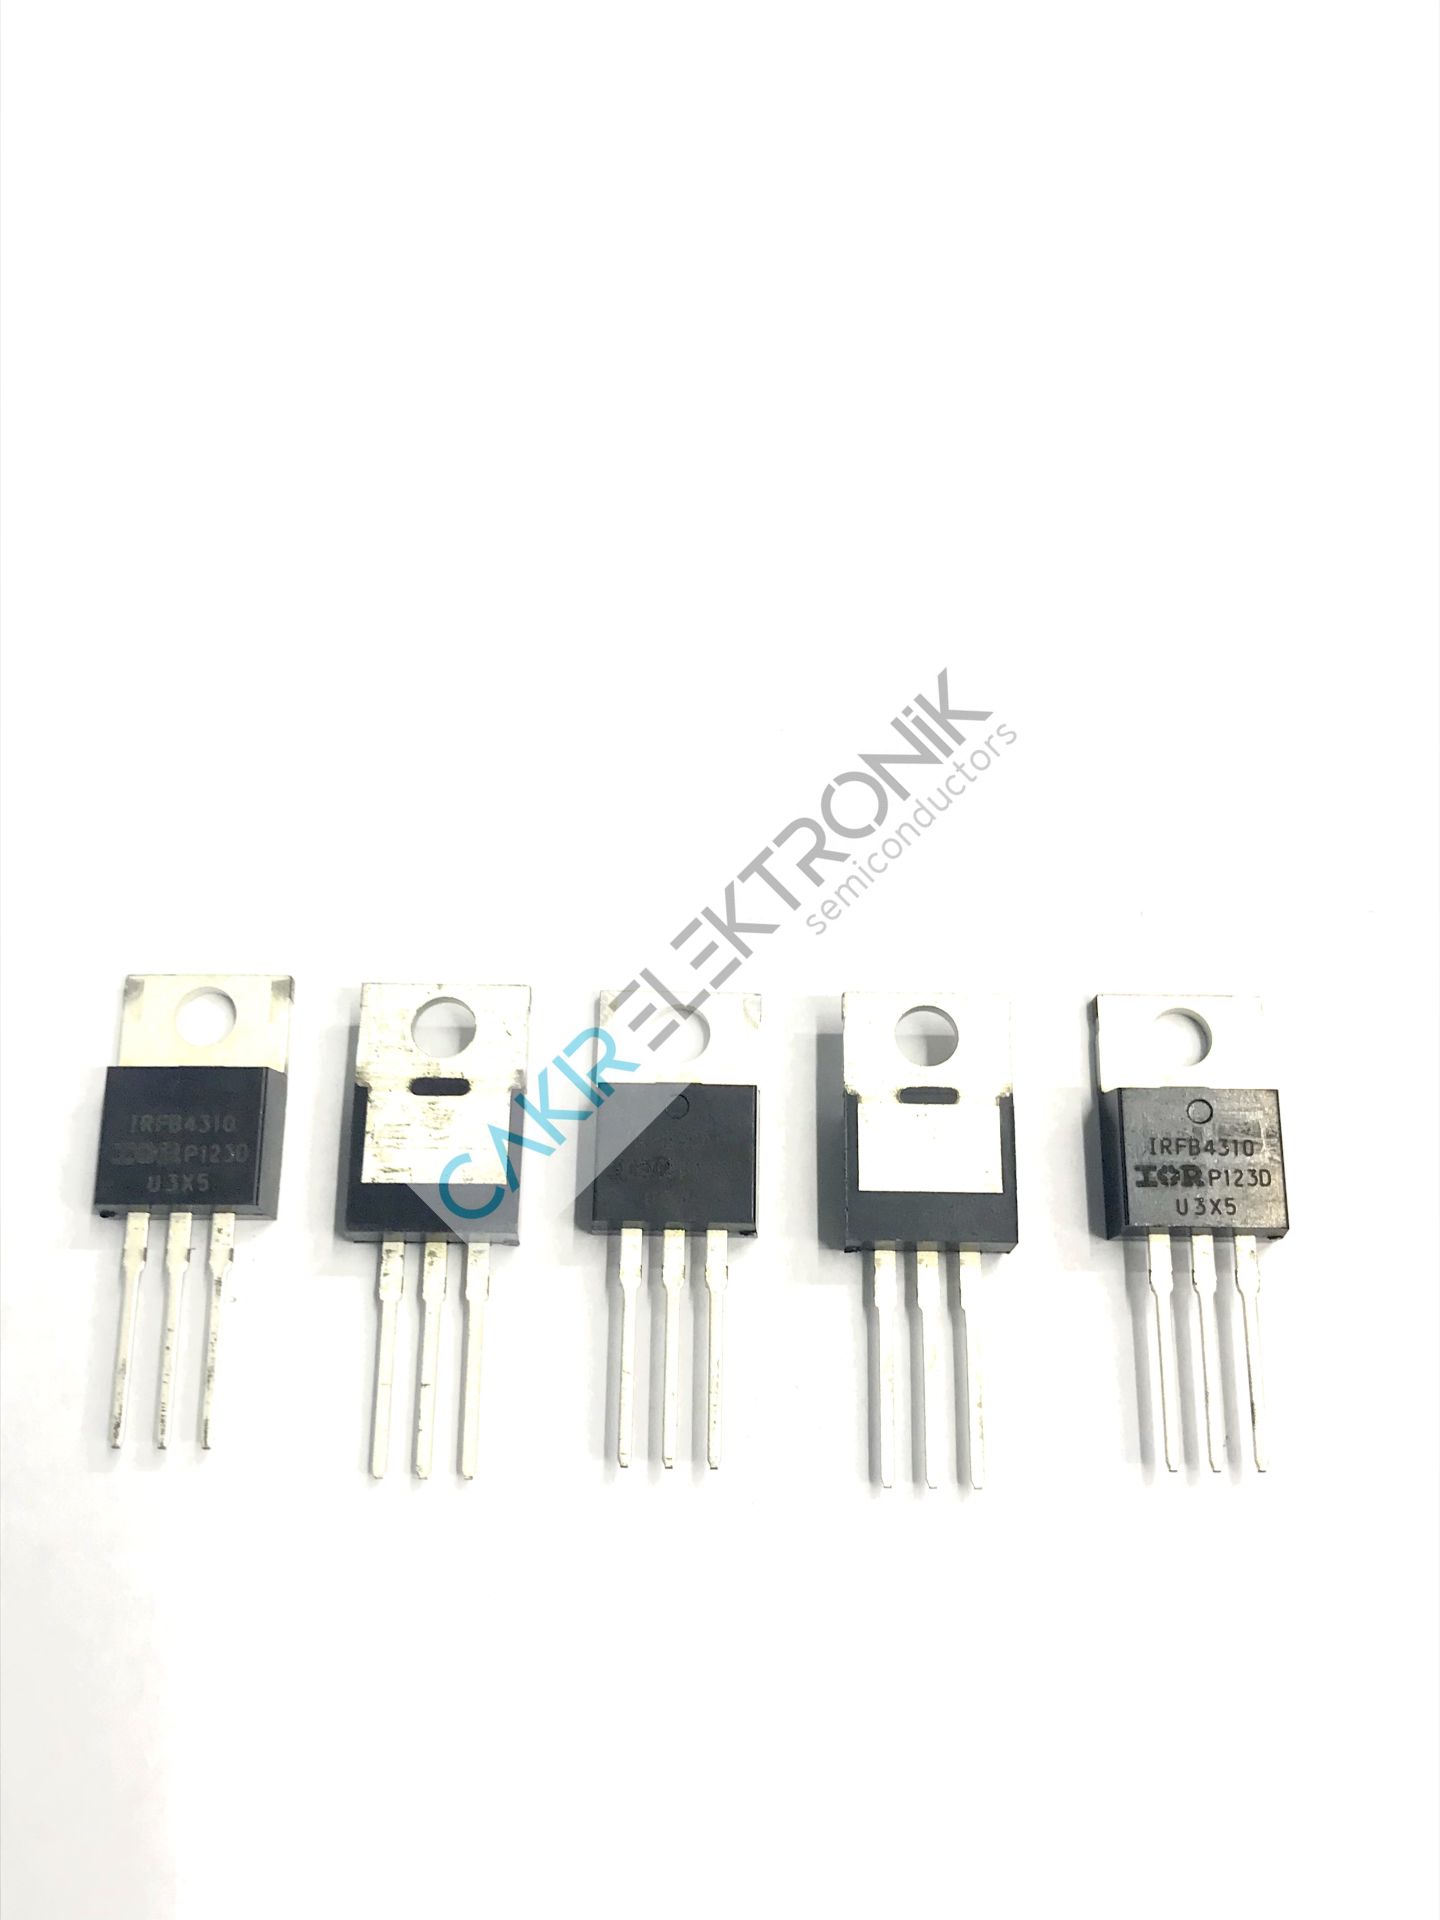 IRFB4310  100V. 140A. N KANAL MOSFET